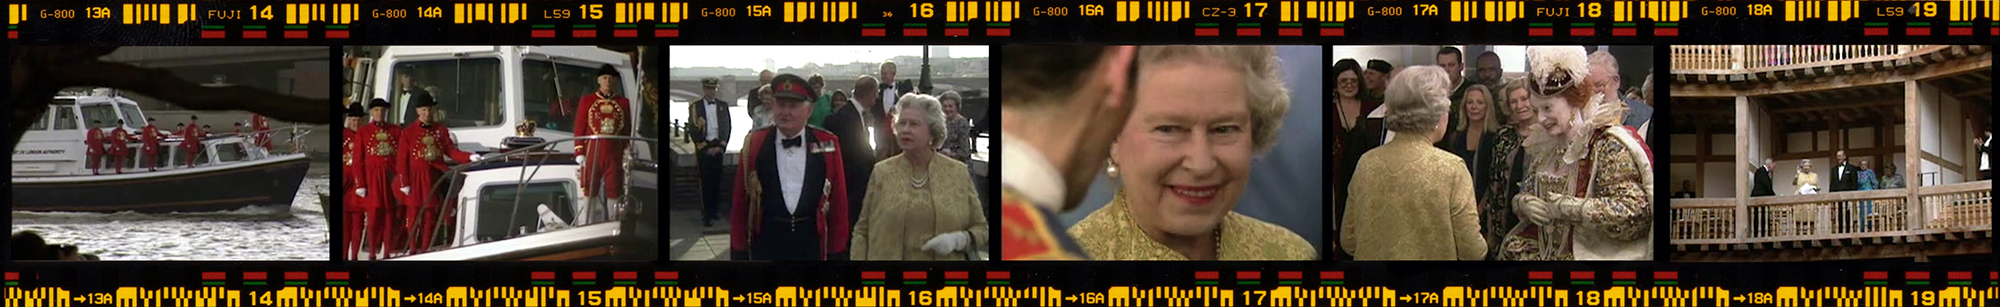 A strip of film photographs showing Her Majesty The Queen attending the opening of the Globe Theatre, including: Her Majesty The Queen travelling by boat with a guard of Royal attendants; a close-up of Her Majesty The Queen smiling.